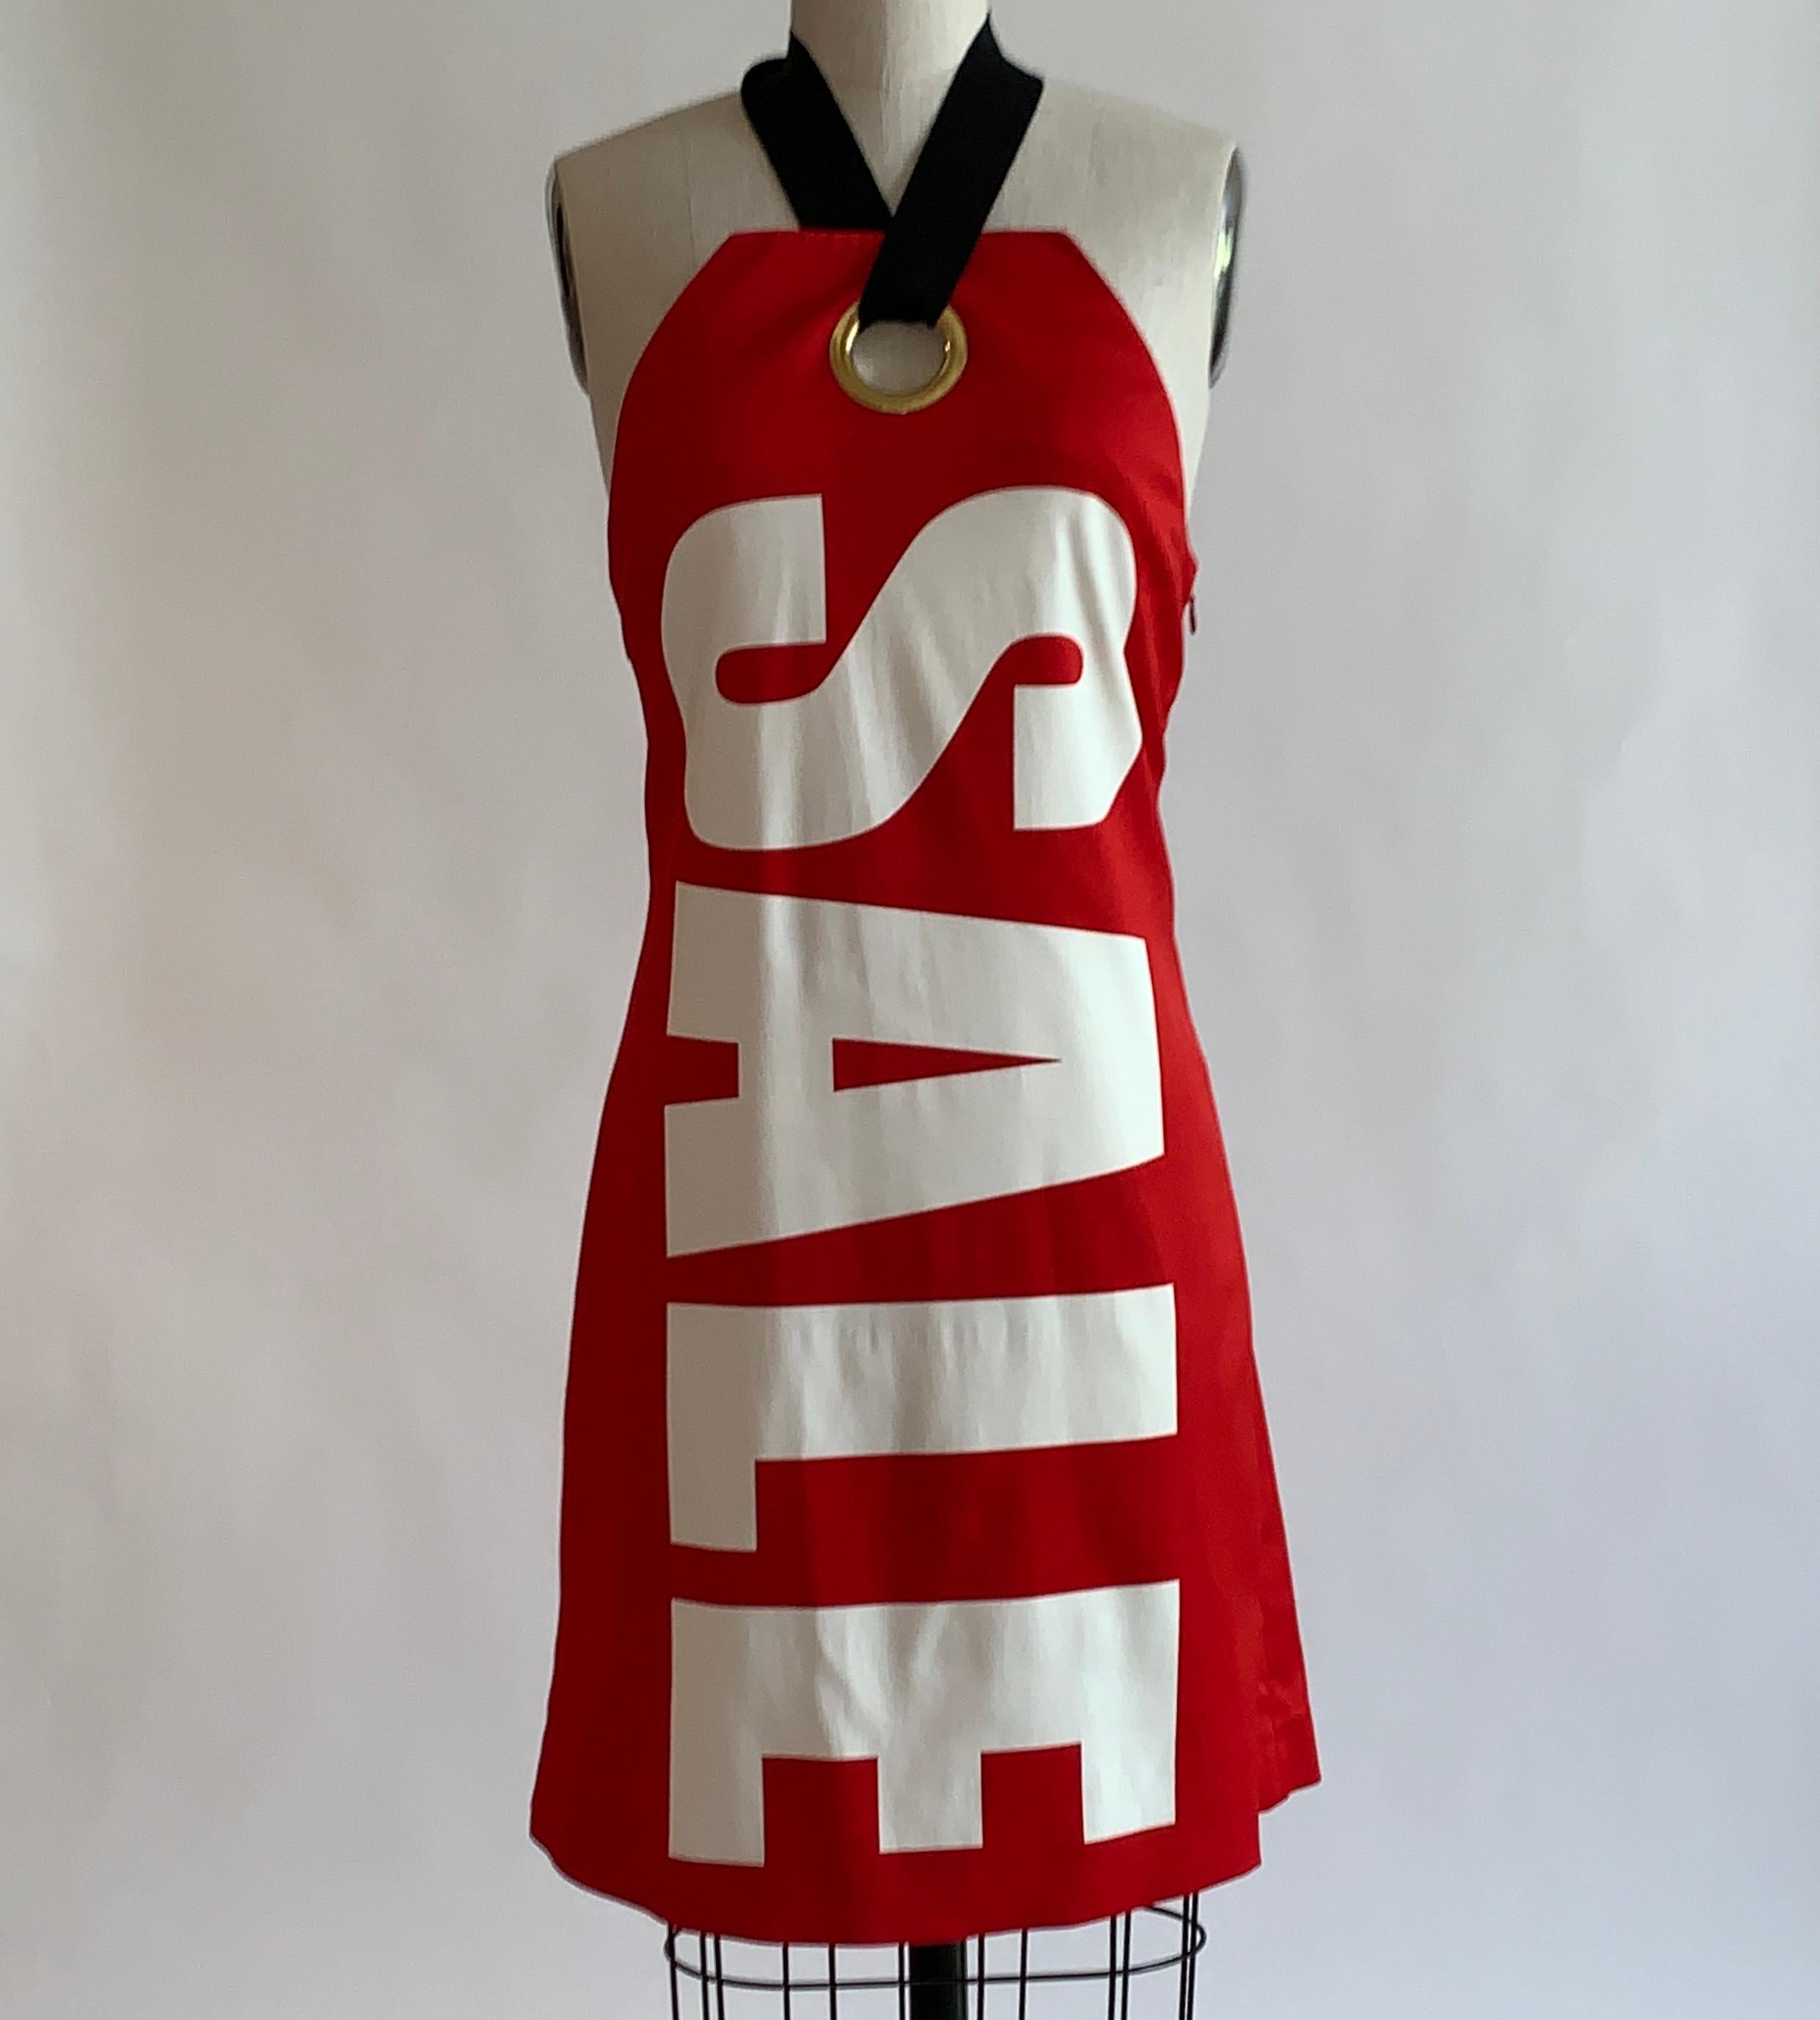 Moschino red and white halter dress designed to look like a retail hang tag with block print reading SALE at front from Jeremy Scott's Resort 2016 collection. Big gold grommet at center chest where black grosgrain strap loops through to tie around